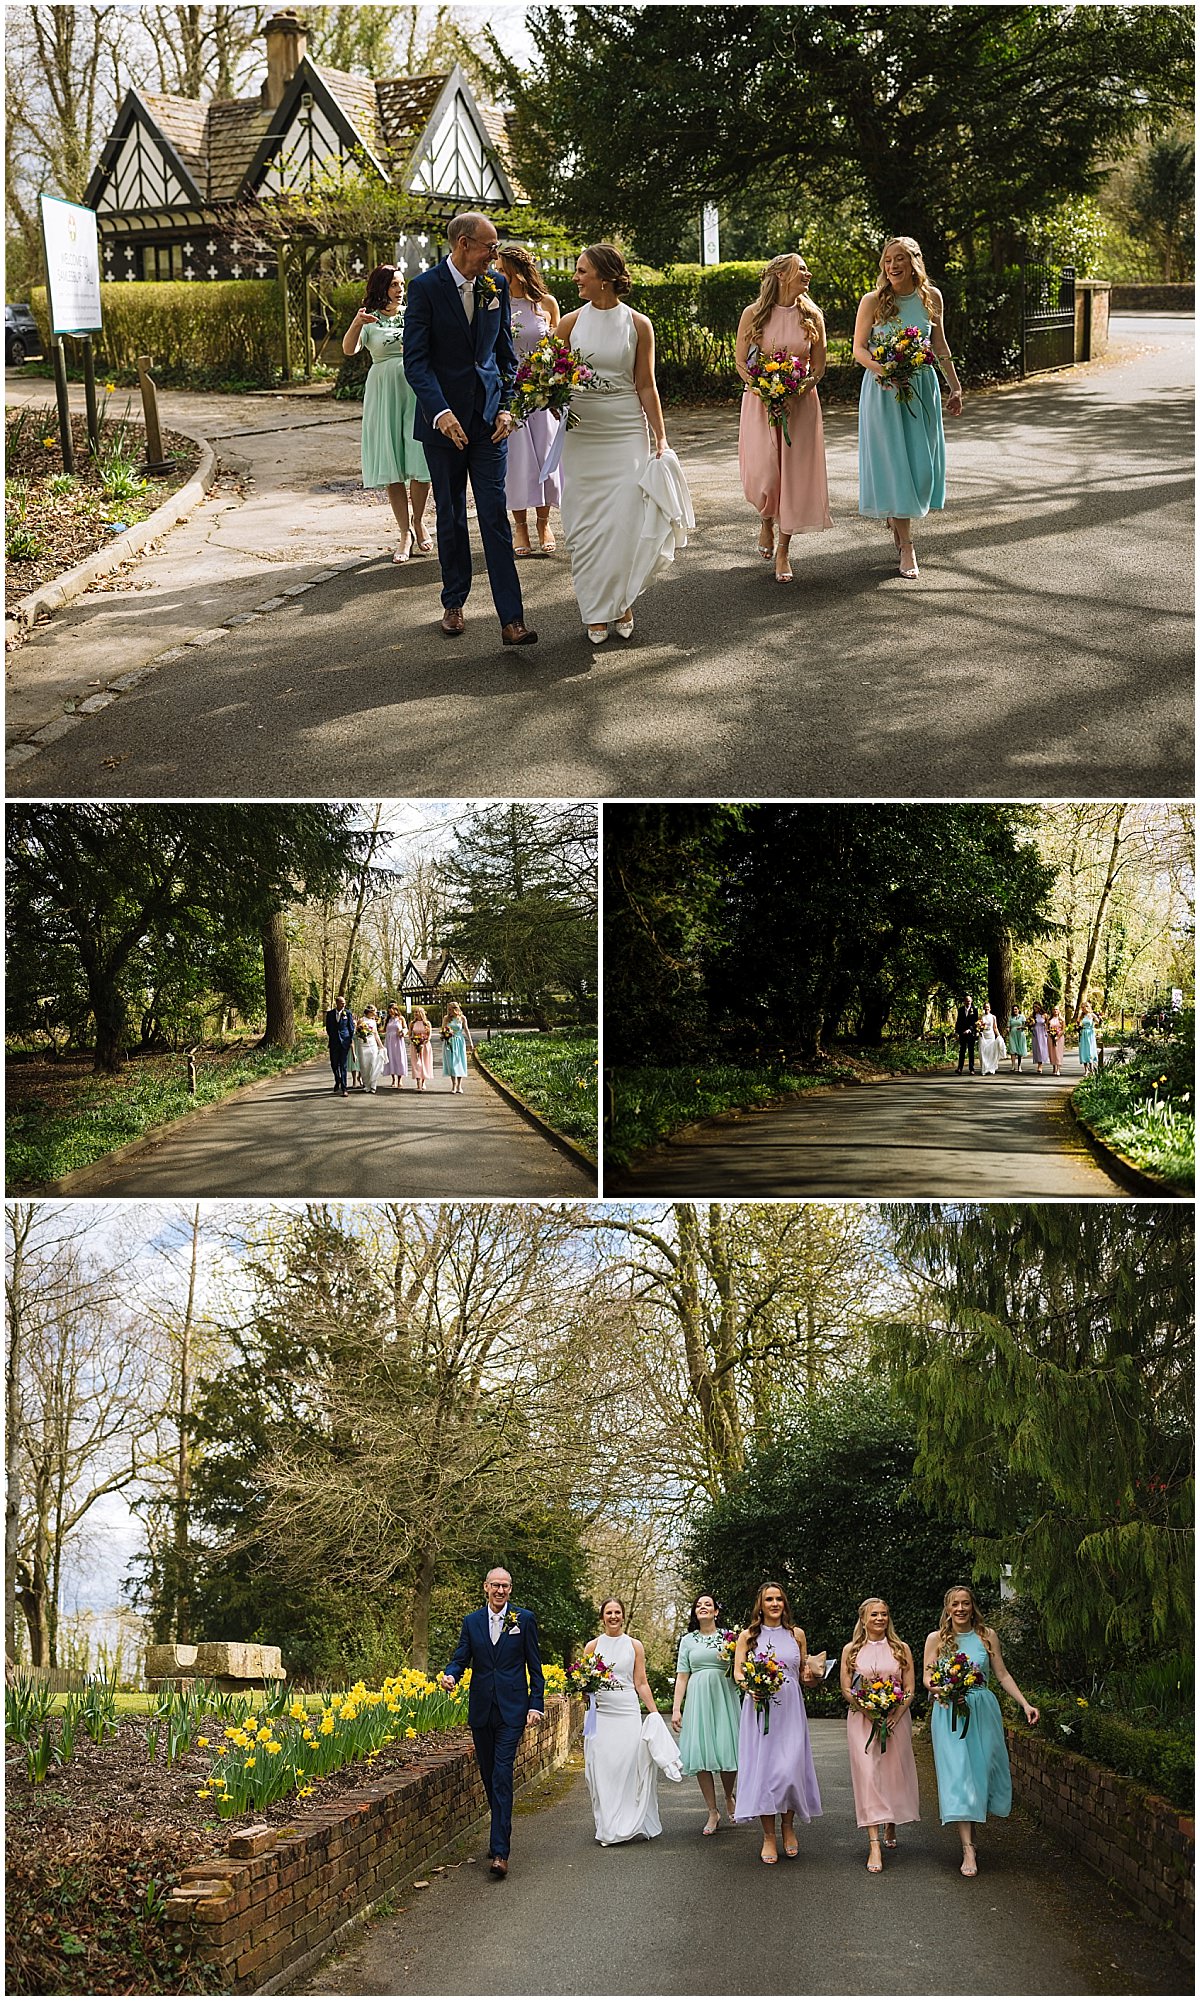 A collage of three images depicting a wedding party walking down a road in a serene outdoor setting. The top and bottom pictures show a group led by a bride in a white dress and a man in a suit, followed by bridesmaids in pastel-colored dresses, carrying bouquets. The central narrow image captures the party from a distance amidst lush greenery and a backdrop of trees with daffodils lining the roadside.